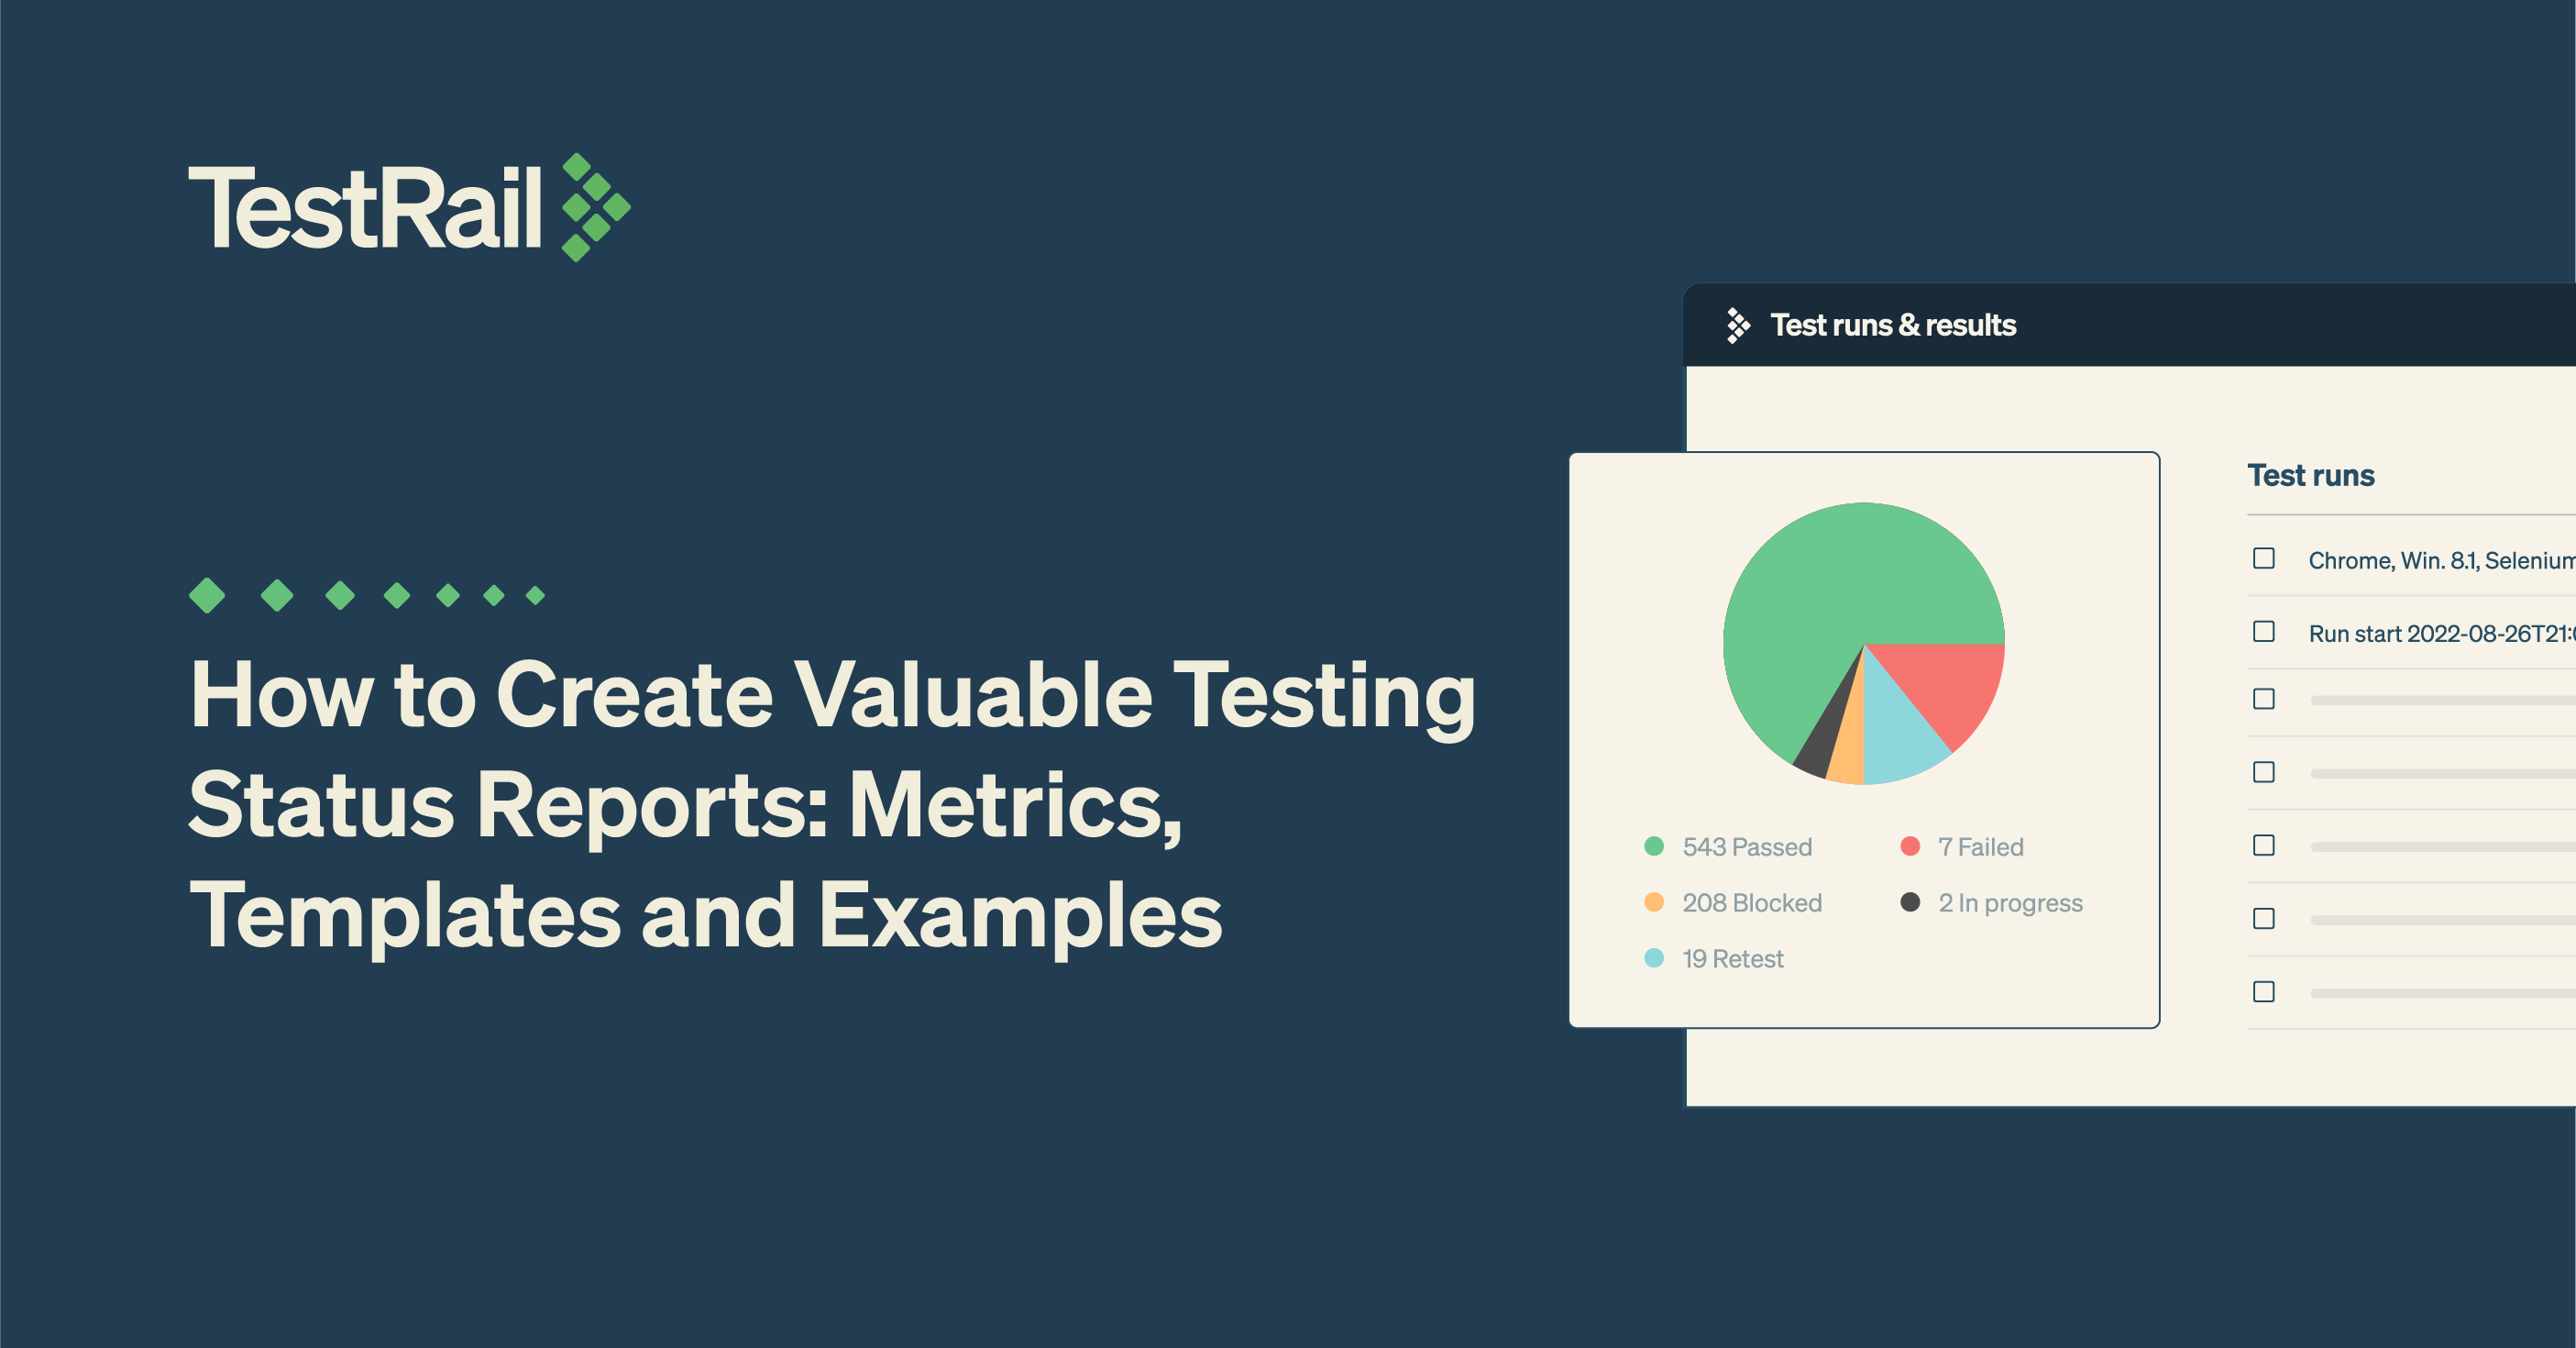 How to Create Valuable Testing Status Reports: Metrics, Templates, and Examples